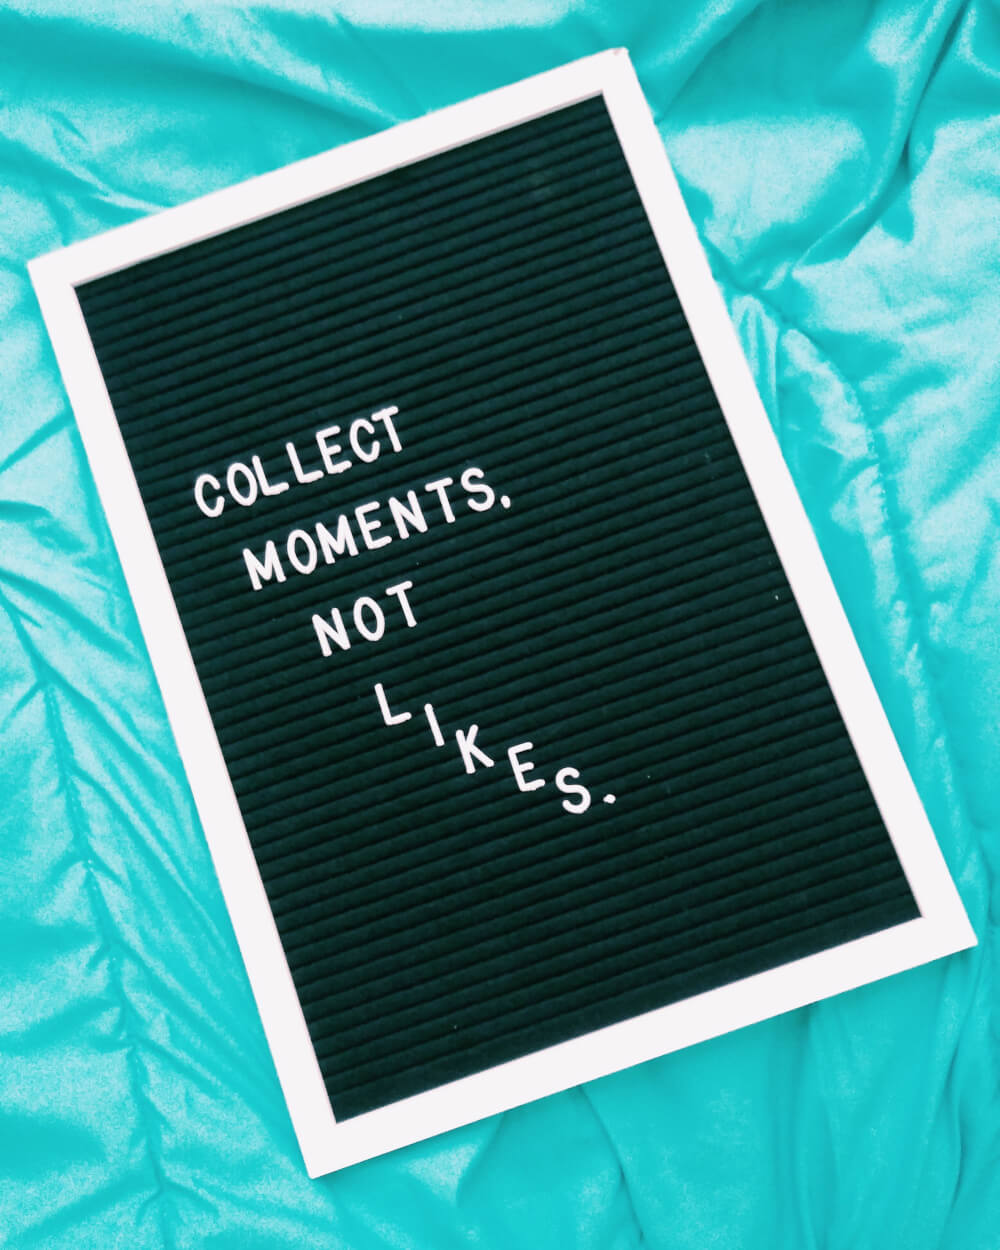 Letter board: Collect moments, not likes.